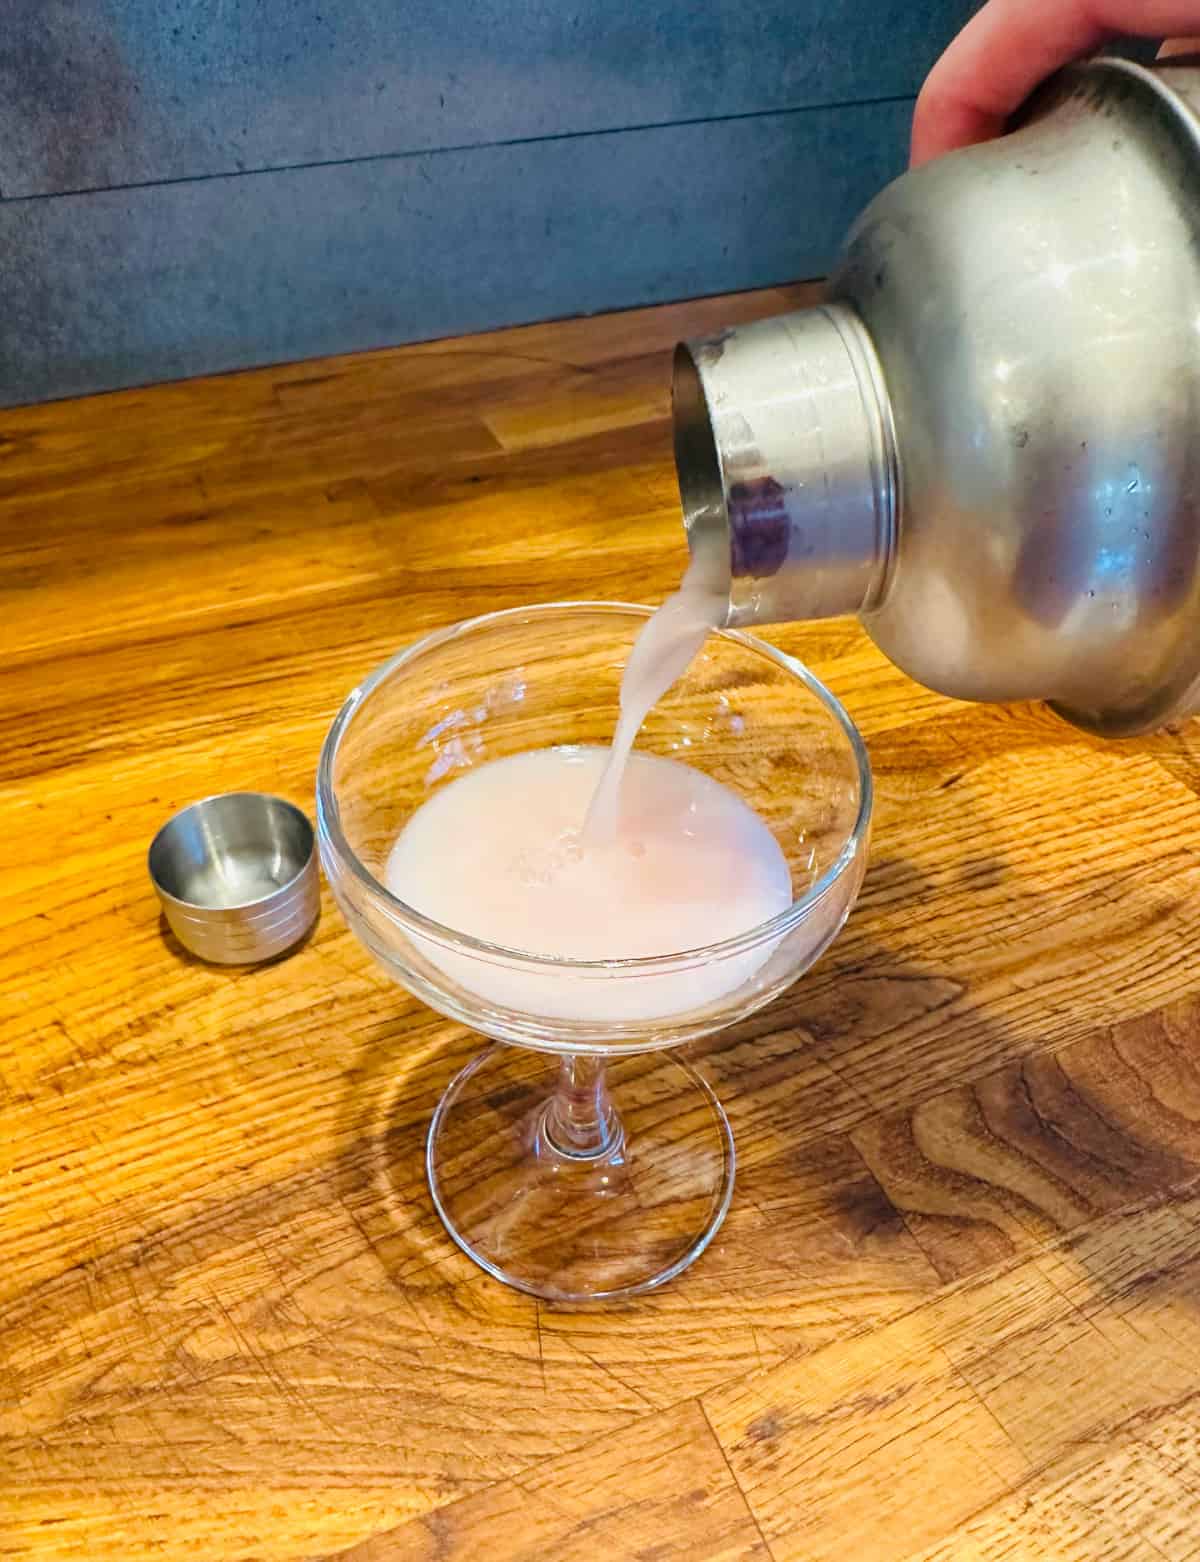 Pale pink liquid being poured from a cocktail shaker into a coupe glass.